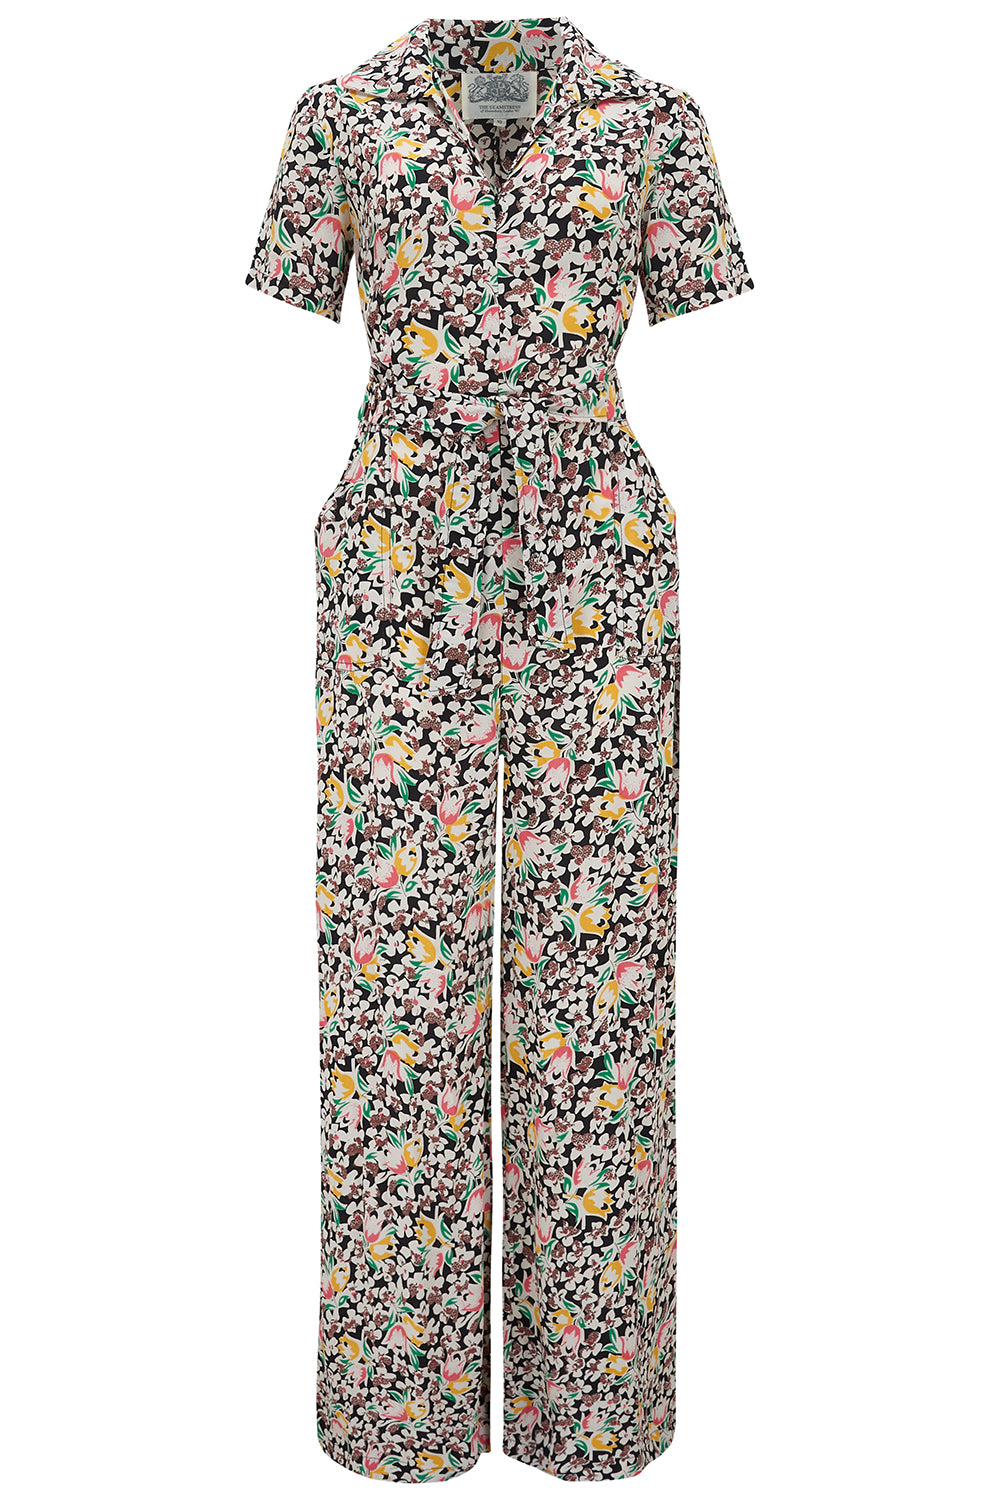 "Lauren" Siren Jump Suit in Tulip Print by The Seamstress of Bloomsbury, Classic 1940s True Vintage Style - True and authentic vintage style clothing, inspired by the Classic styles of CC41 , WW2 and the fun 1950s RocknRoll era, for everyday wear plus events like Goodwood Revival, Twinwood Festival and Viva Las Vegas Rockabilly Weekend Rock n Romance The Seamstress Of Bloomsbury